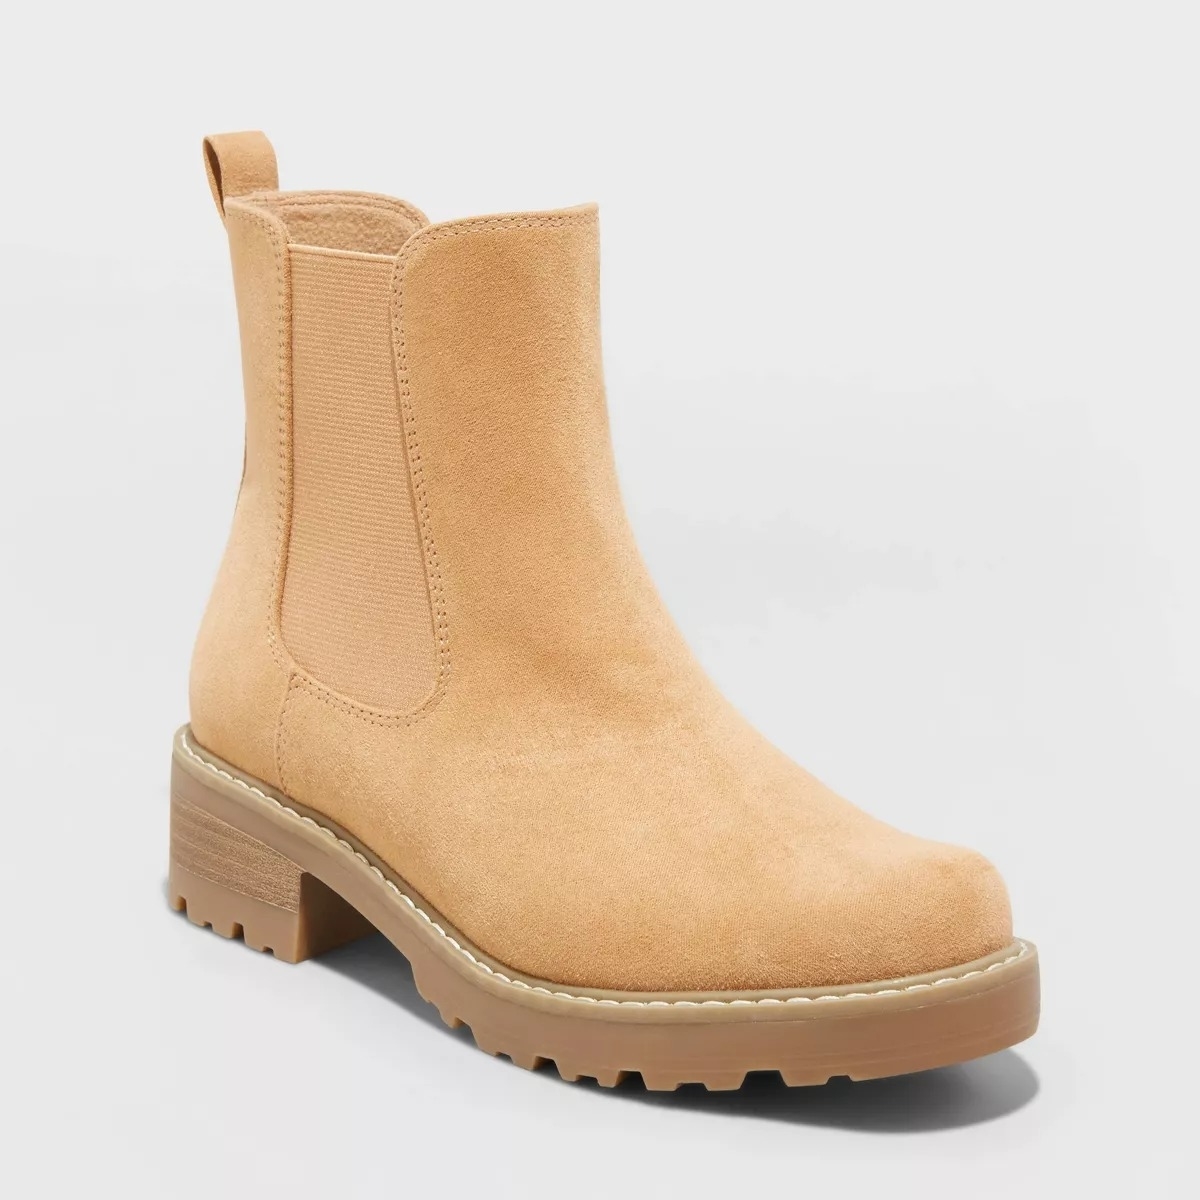 suede-like ankle boots in beige color